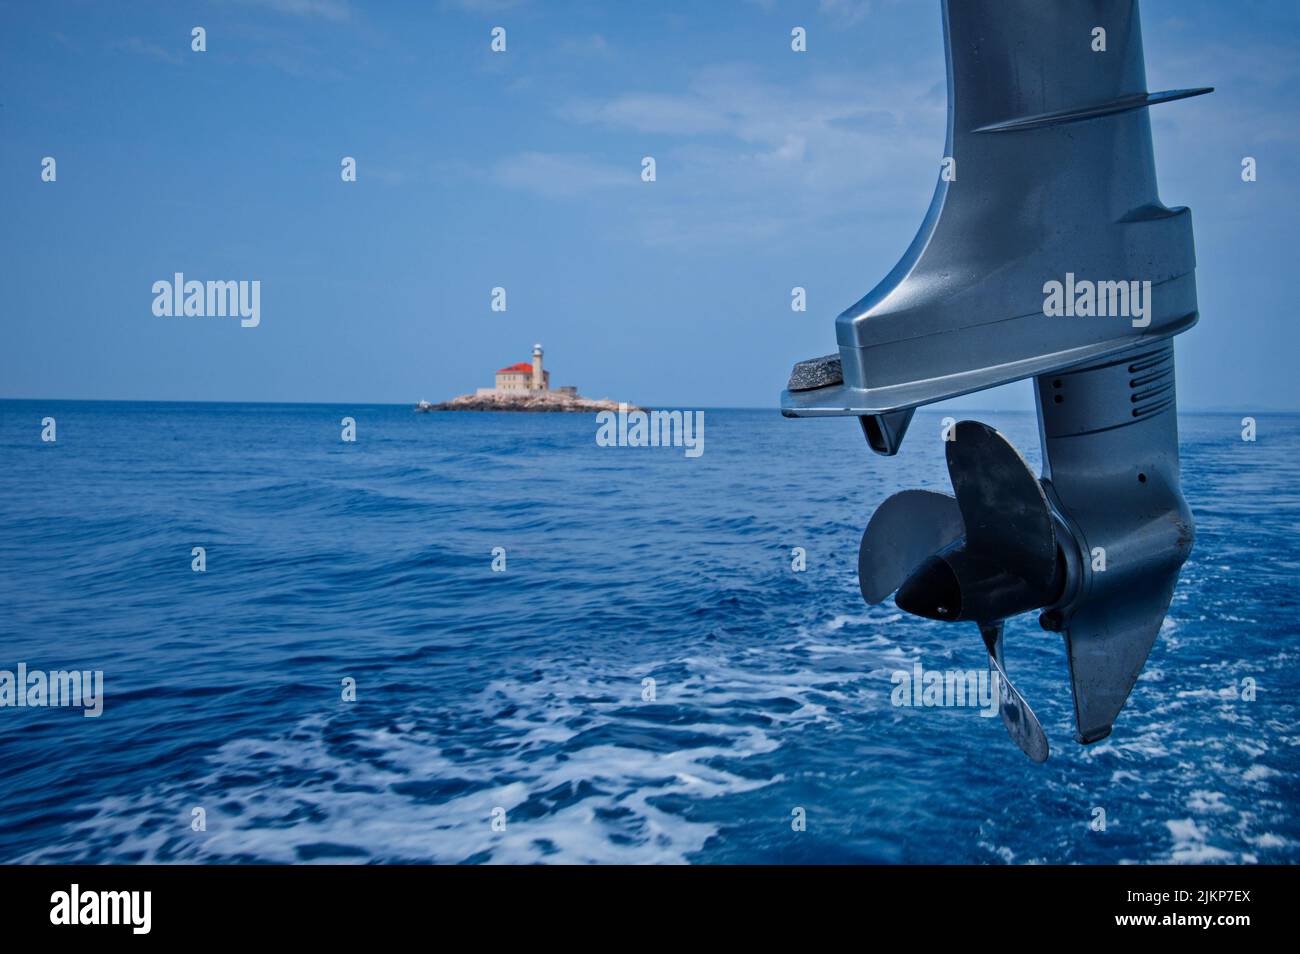 Sailing boat propeller against blue sea with lighthouse in background Stock Photo